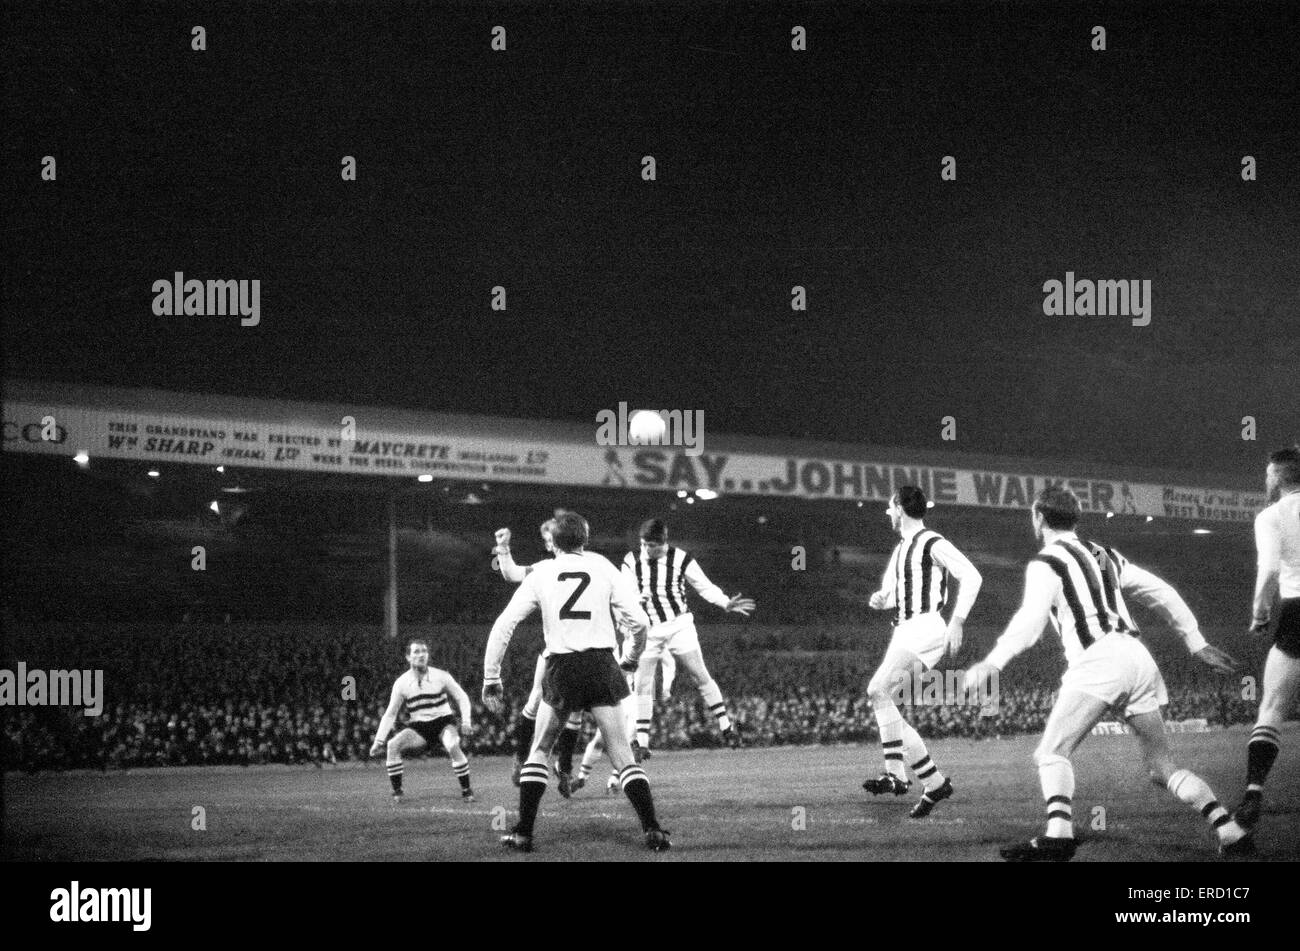 Inter Cities Fairs Cup Second Round Second Leg match at the Hawthorns. West Bromwich Albion 5 v DOS Utrecht 2. Tony Brown of West Brom challenging for the ball in the air.  9th November 1966. Stock Photo